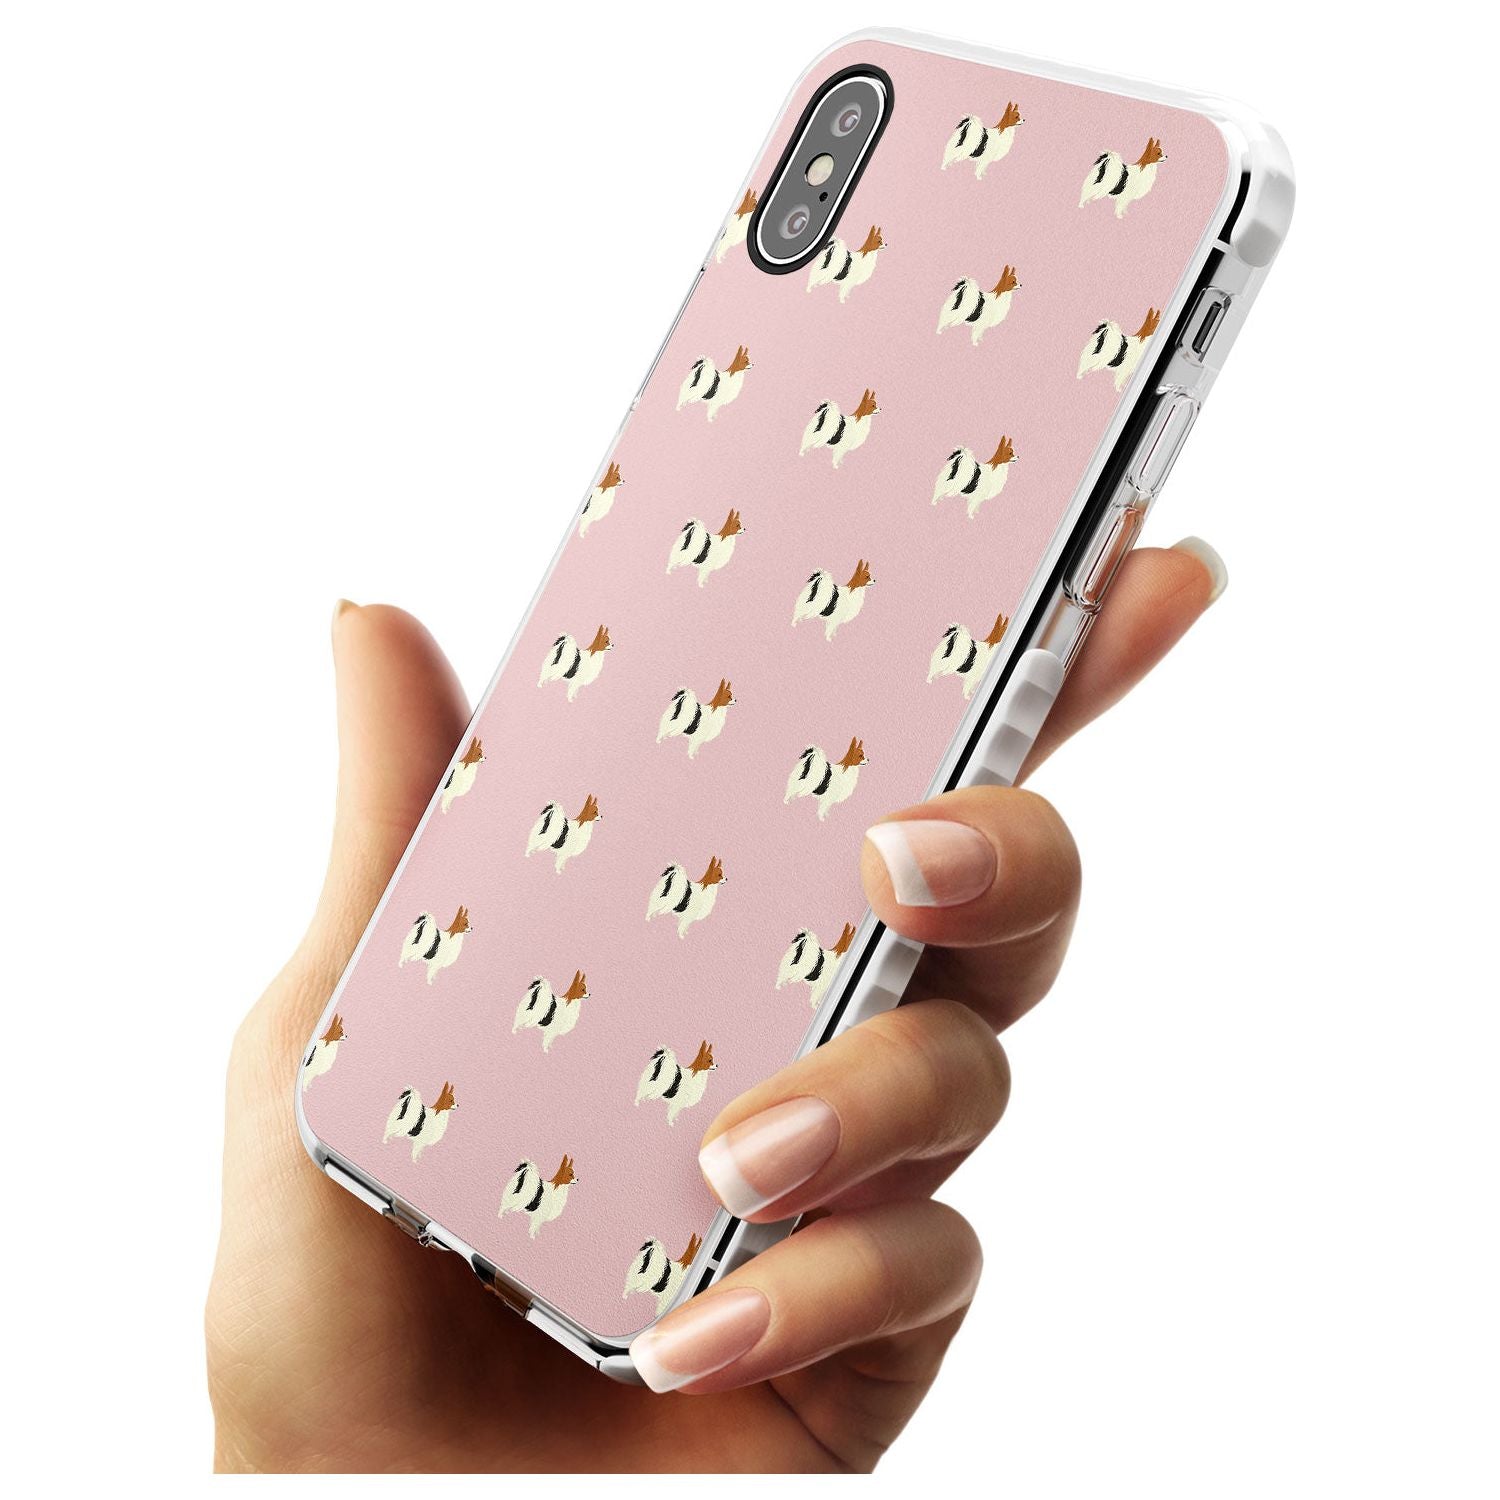 Papillon Dog Pattern Impact Phone Case for iPhone X XS Max XR